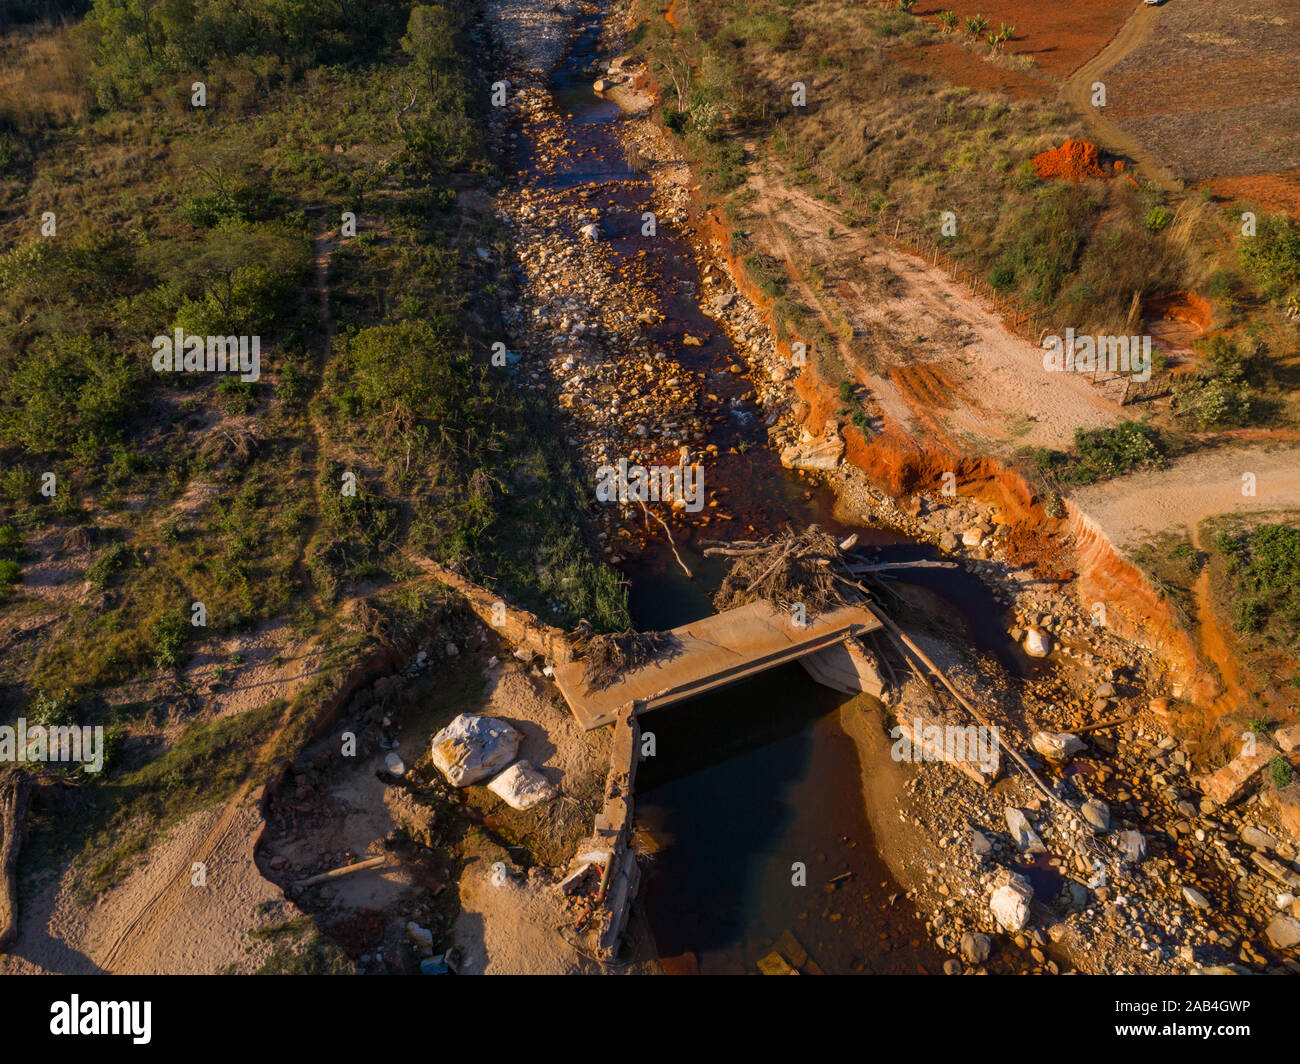 Damage caused by Cyclone Idai seen from the air in Zimbabwe's Chimanimani region. Stock Photo